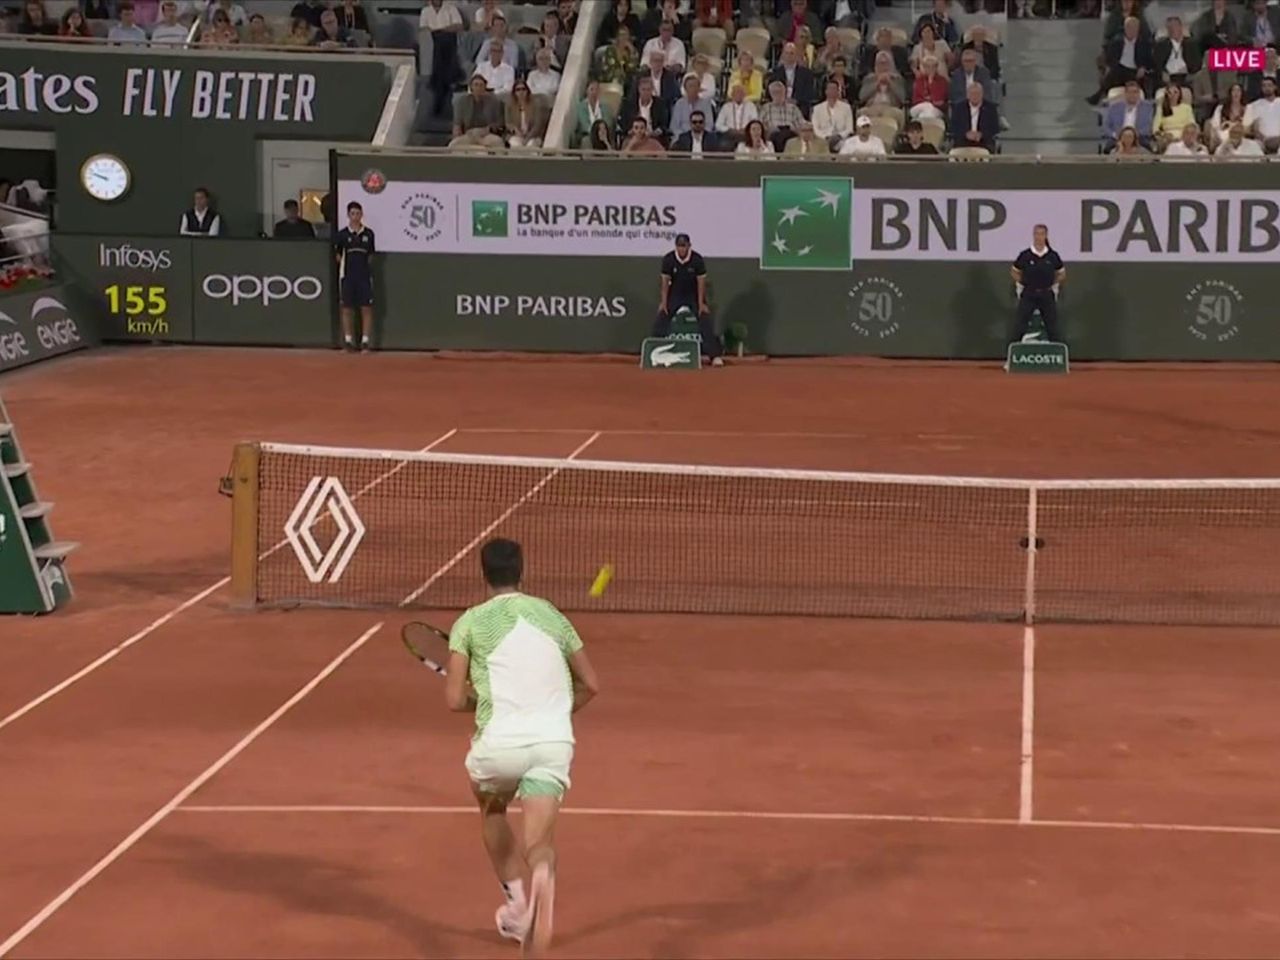 French Open Its like watching Michael Jordan or Virat Kohli - Carlos Alcaraz continues to amaze in stunning display - Tennis video